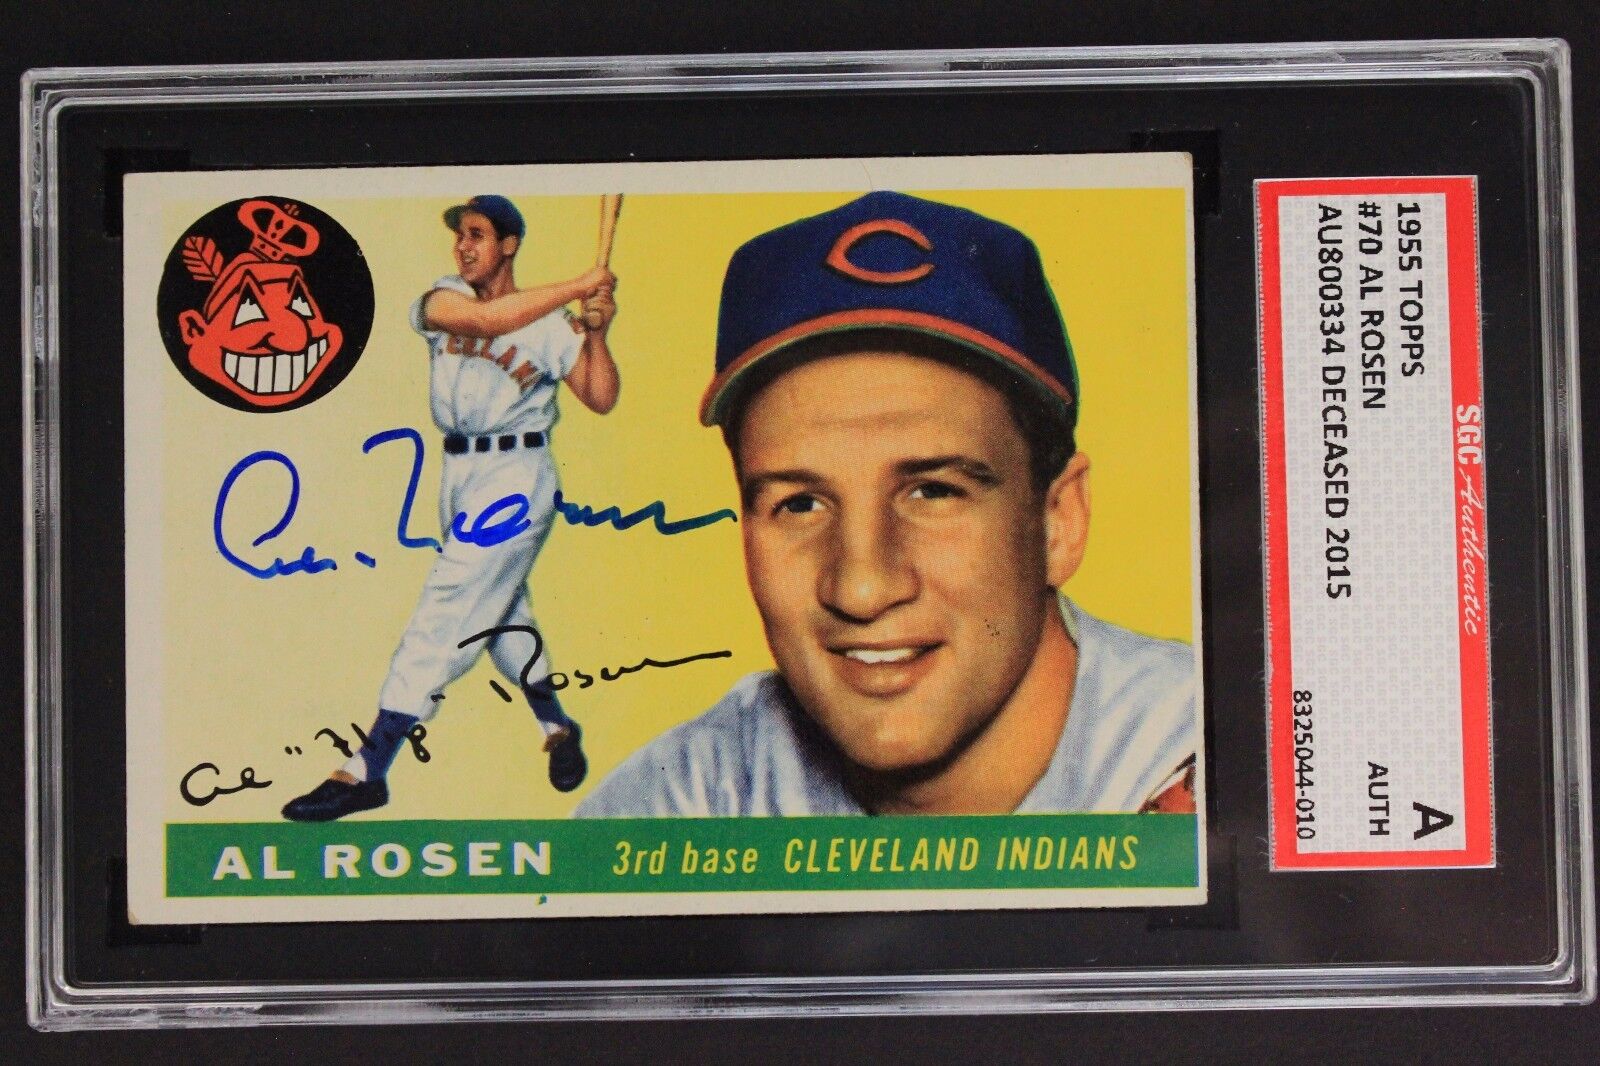 AL ROSEN Indians 1955 TOPPS #70 Autographed Signed Card SGC Authentic